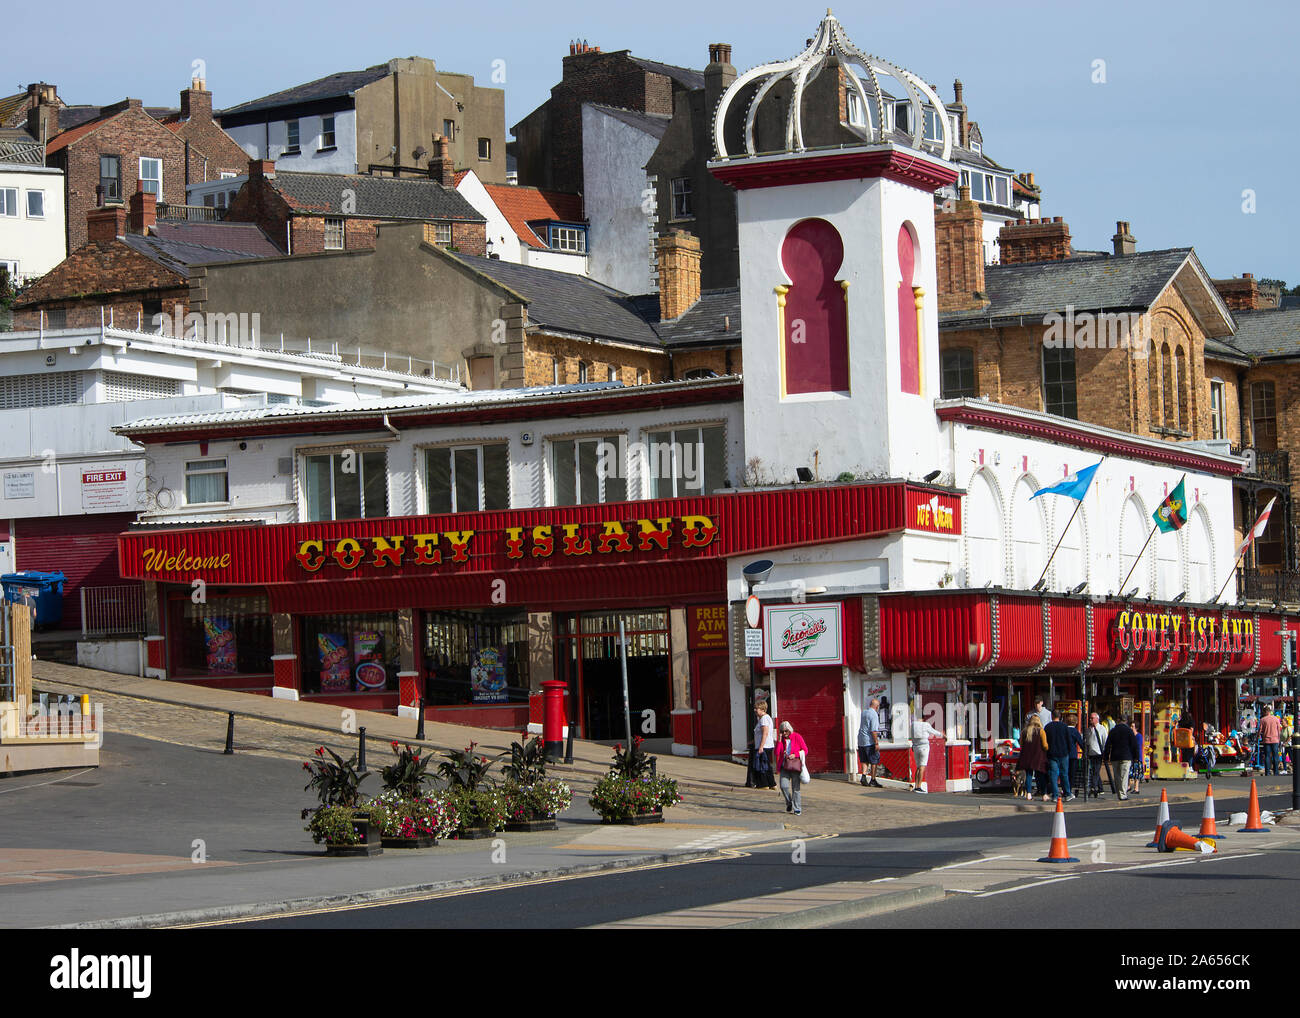 The Coney Isalnd Amusement Building and Arcade with Slot Machines and Games in Scarborough North Yorkshire England United Kingdom UK Stock Photo